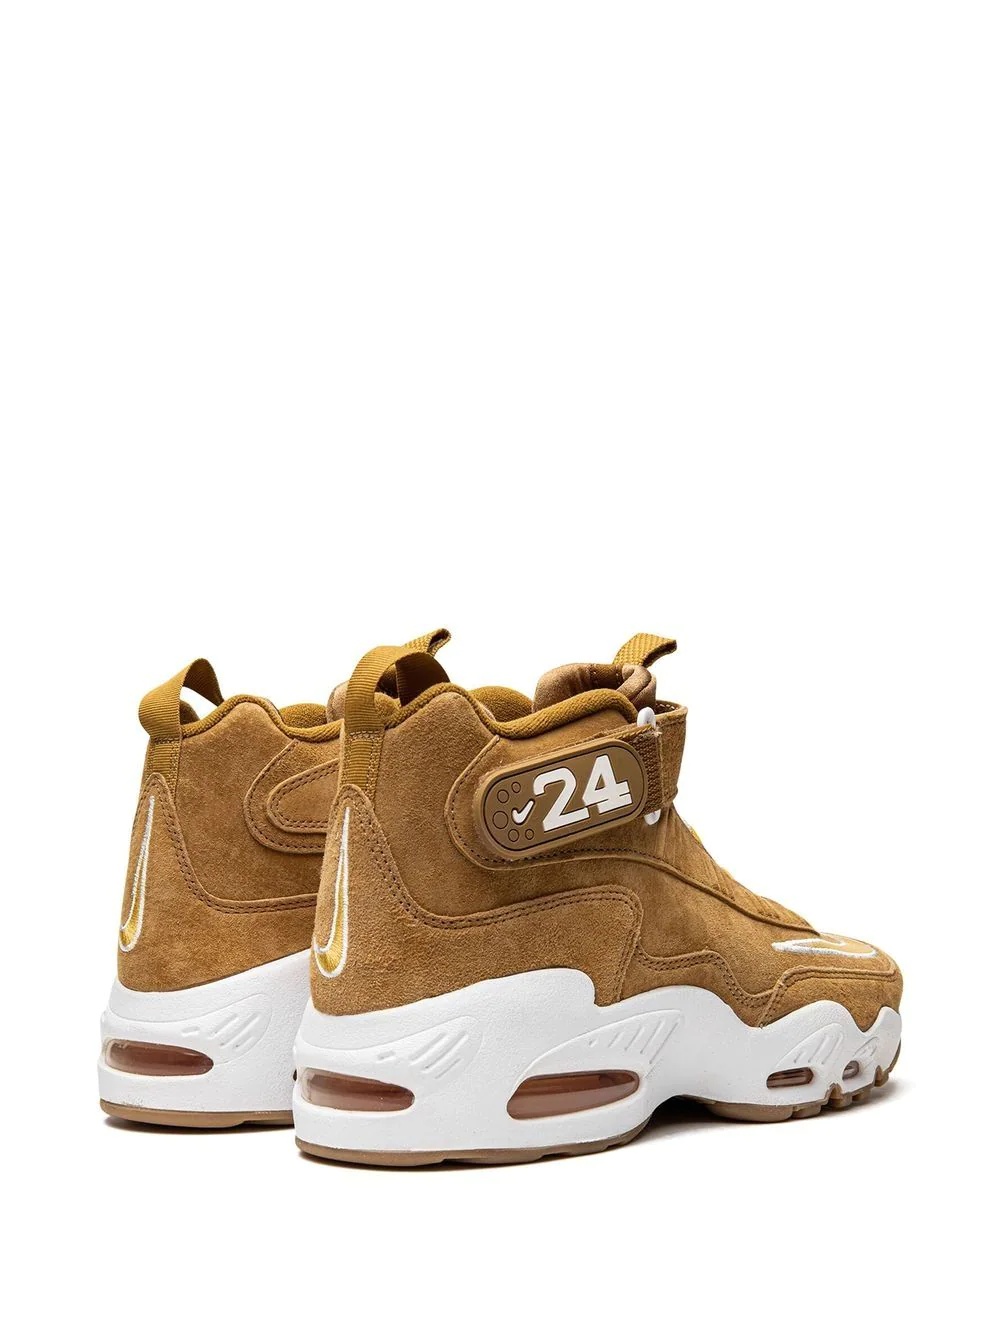 Air Griffey Max 1 "Wheat" sneakers - 3